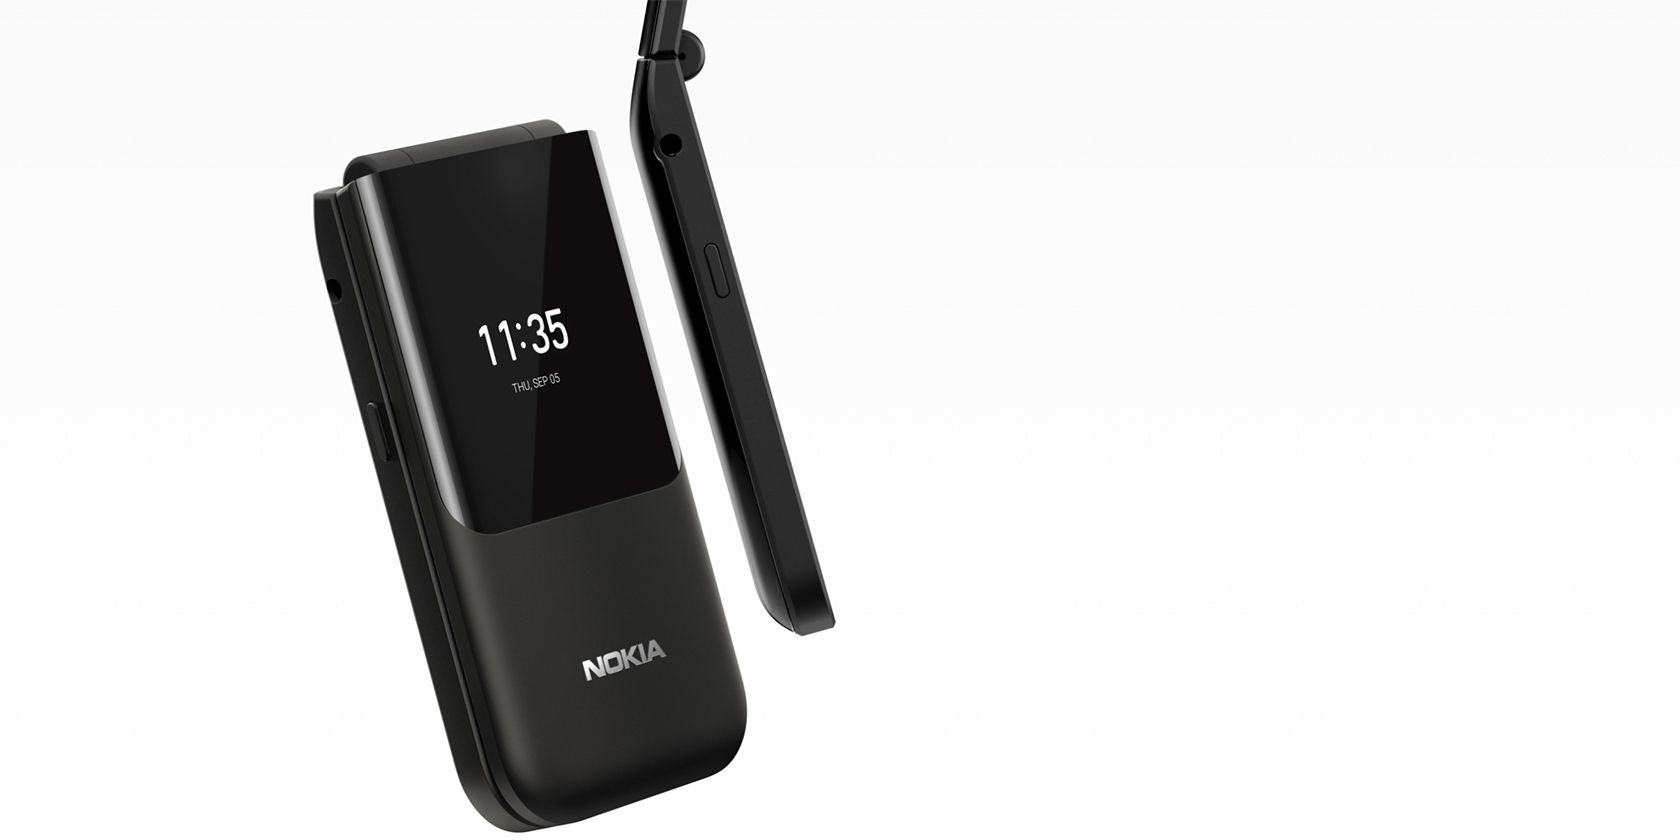 The Nostalgic Nokia 2720 Flip Phone Is Finally Available in the US